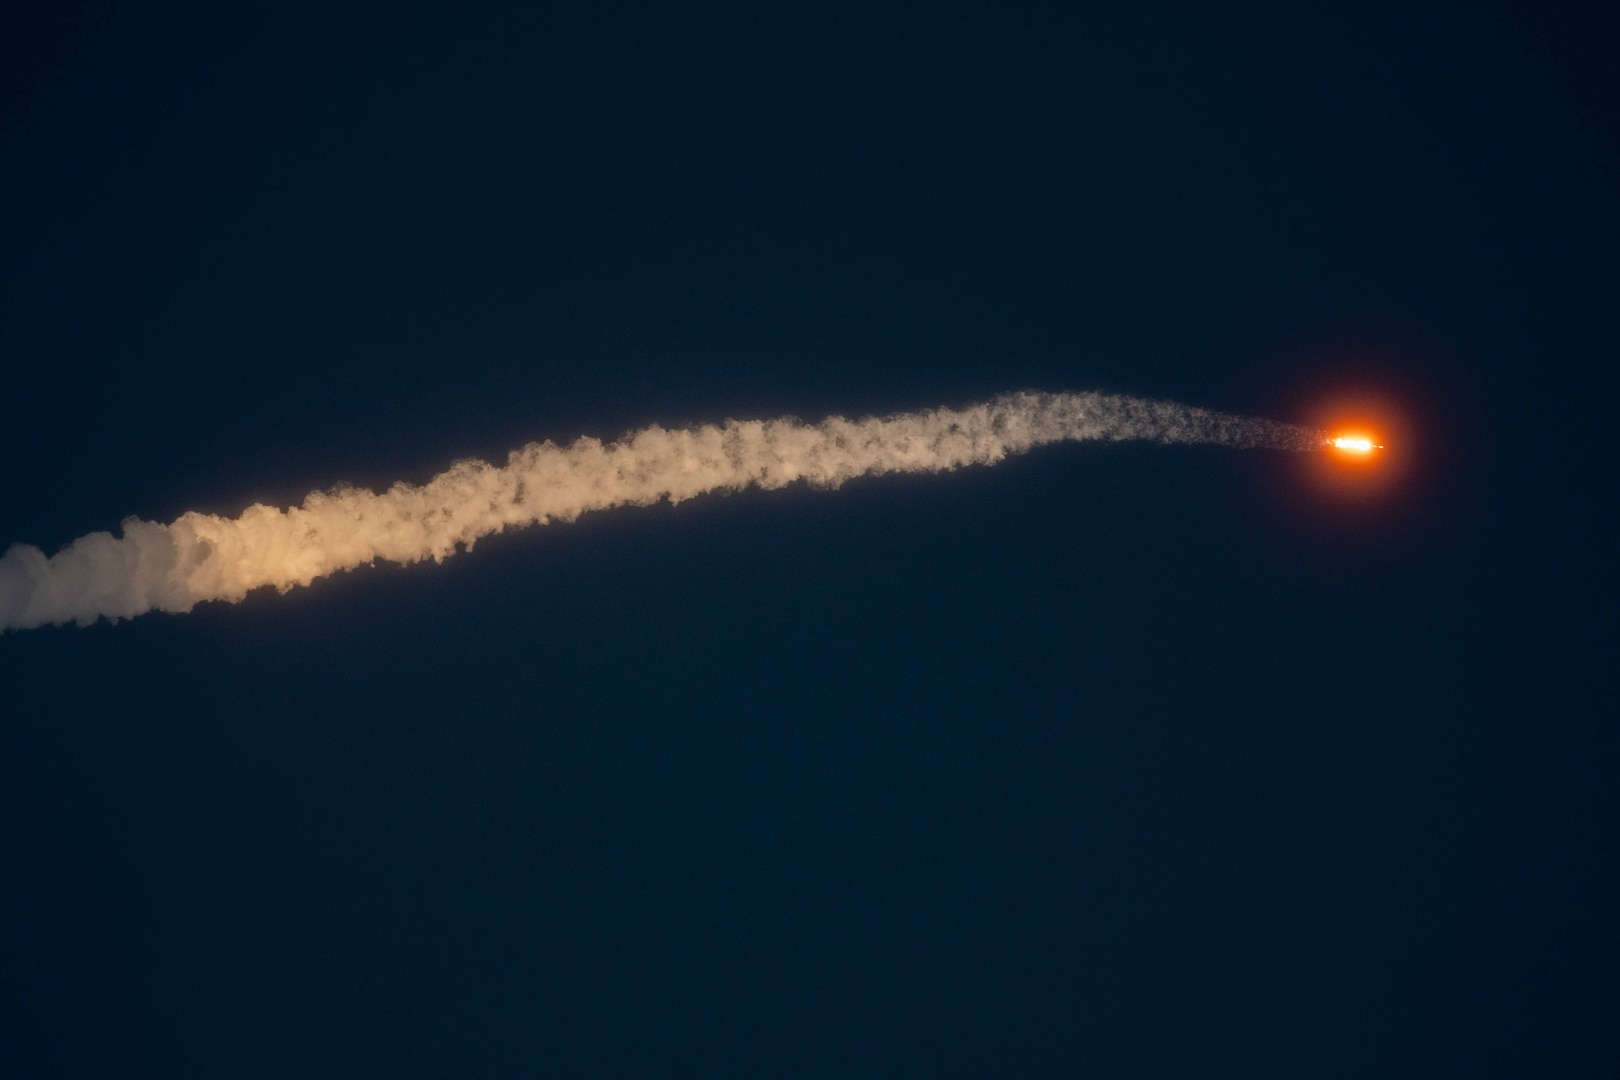 A rocket launches at night.